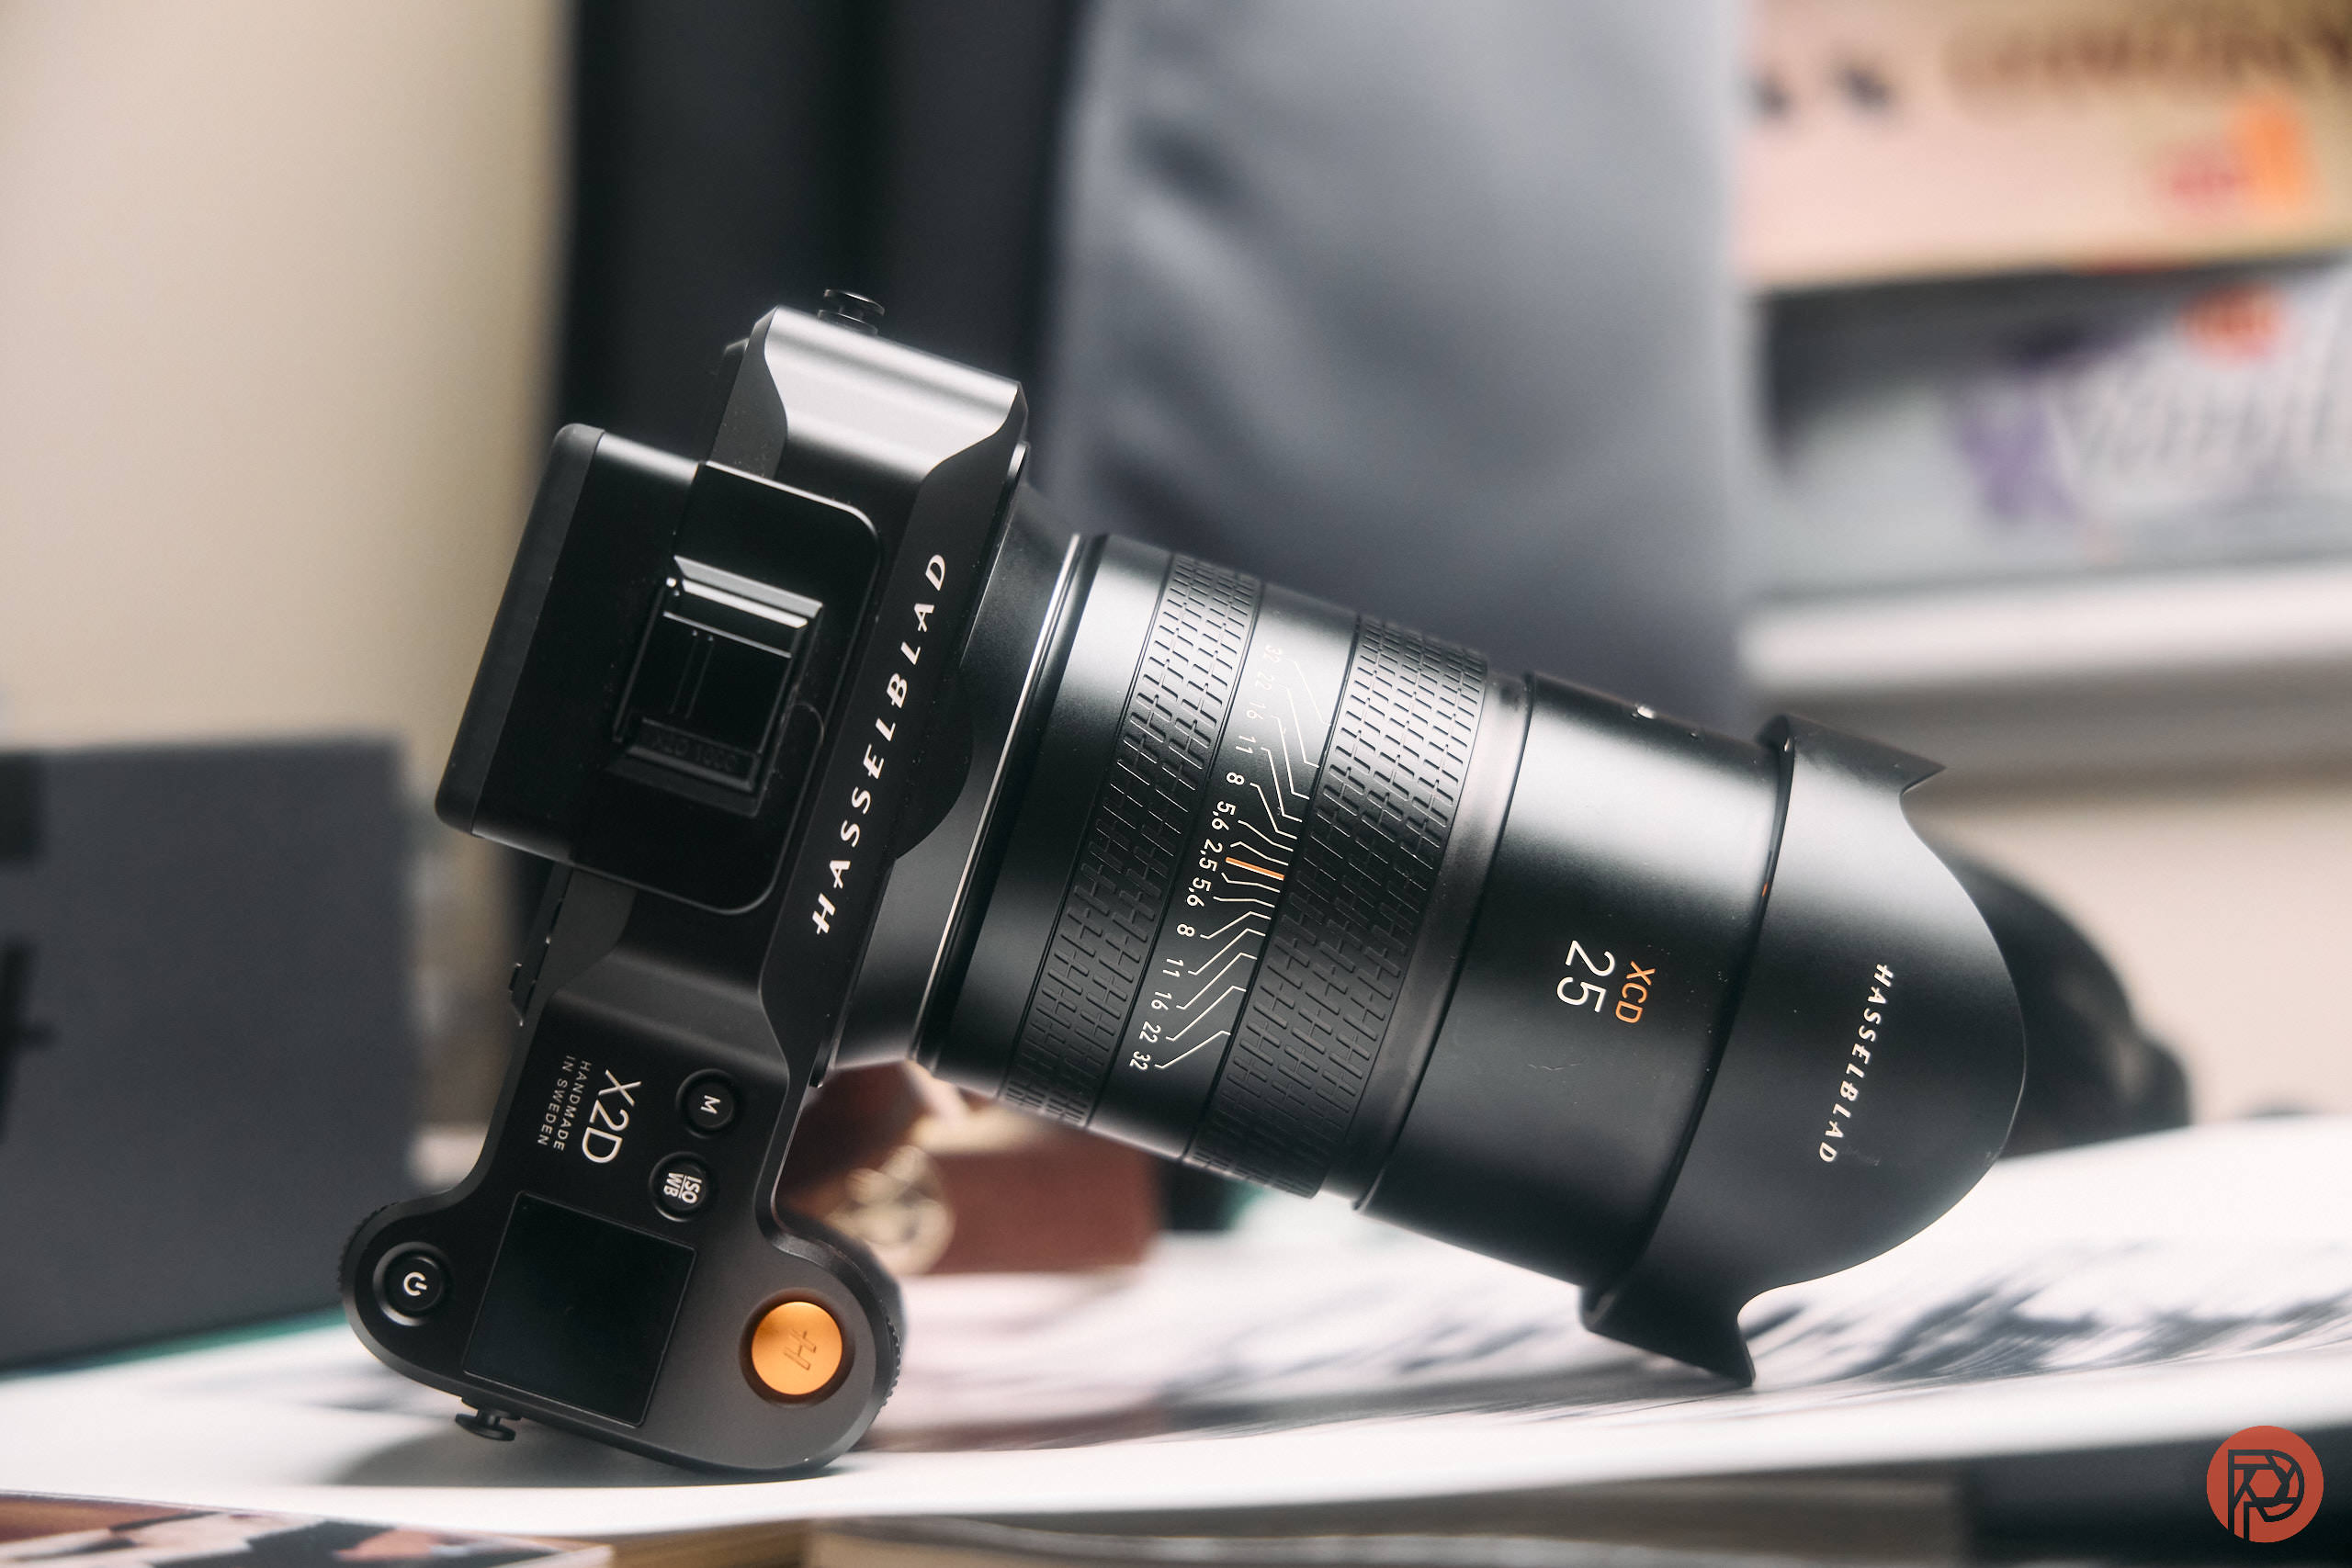 Chris Gampat The Phoblographer Hasselblad 25mm f2.5 product images review 41-30s1600 2